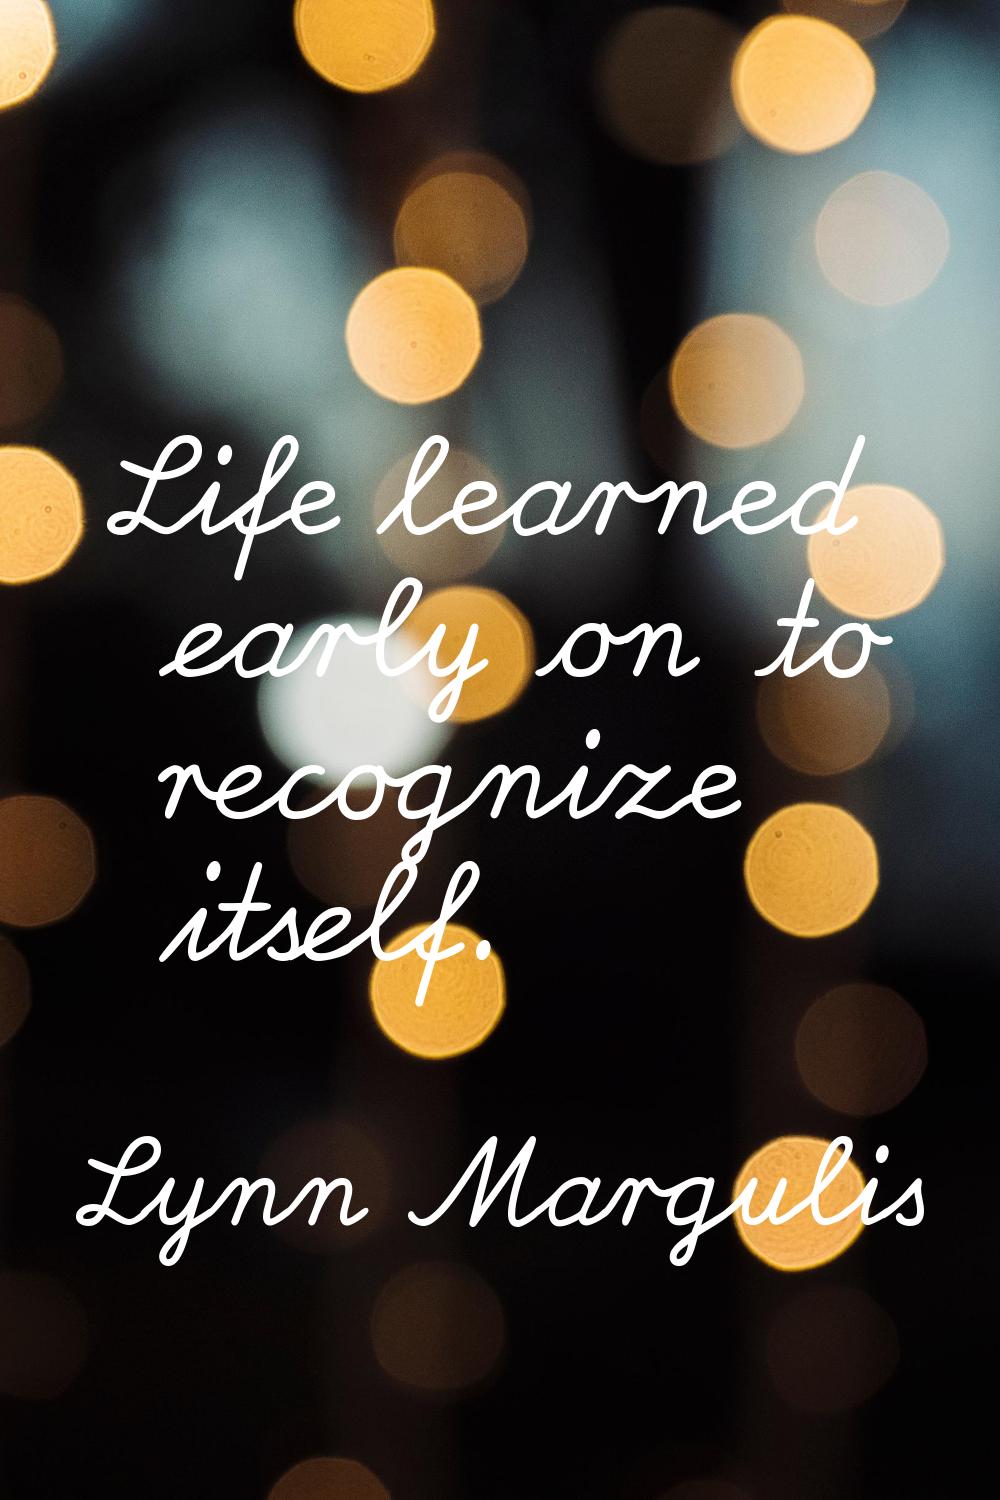 Life learned early on to recognize itself.